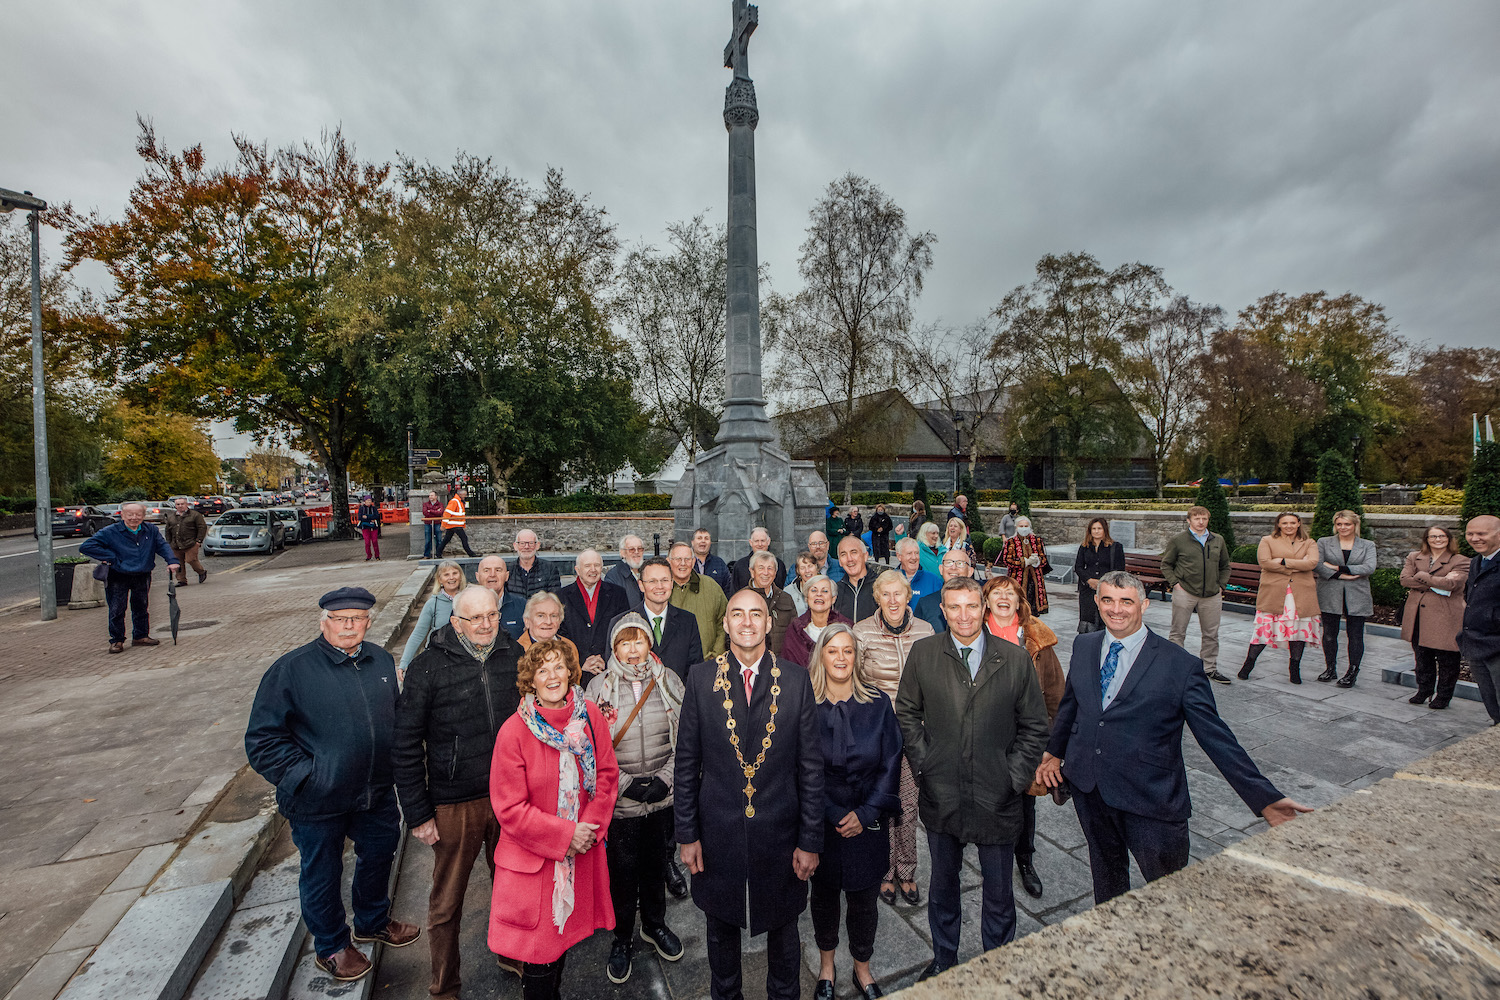 Adare Fountain Restored - pictured at the unveiling of The historic Countess Dunraven Fountain in the heart of the picturesque village of Adare in County Limerick as it has been restored to its original grandeur. The freestanding carved limestone monumental fountain which is located between the Holy Trinity Church and the Adare Heritage Centre was erected in 1855 by Caroline Countess of Dunraven to thank the people of Adare who helped extinguish a fire in the nearby Adare Manor, 11 years previous. Picture: Brian Arthur